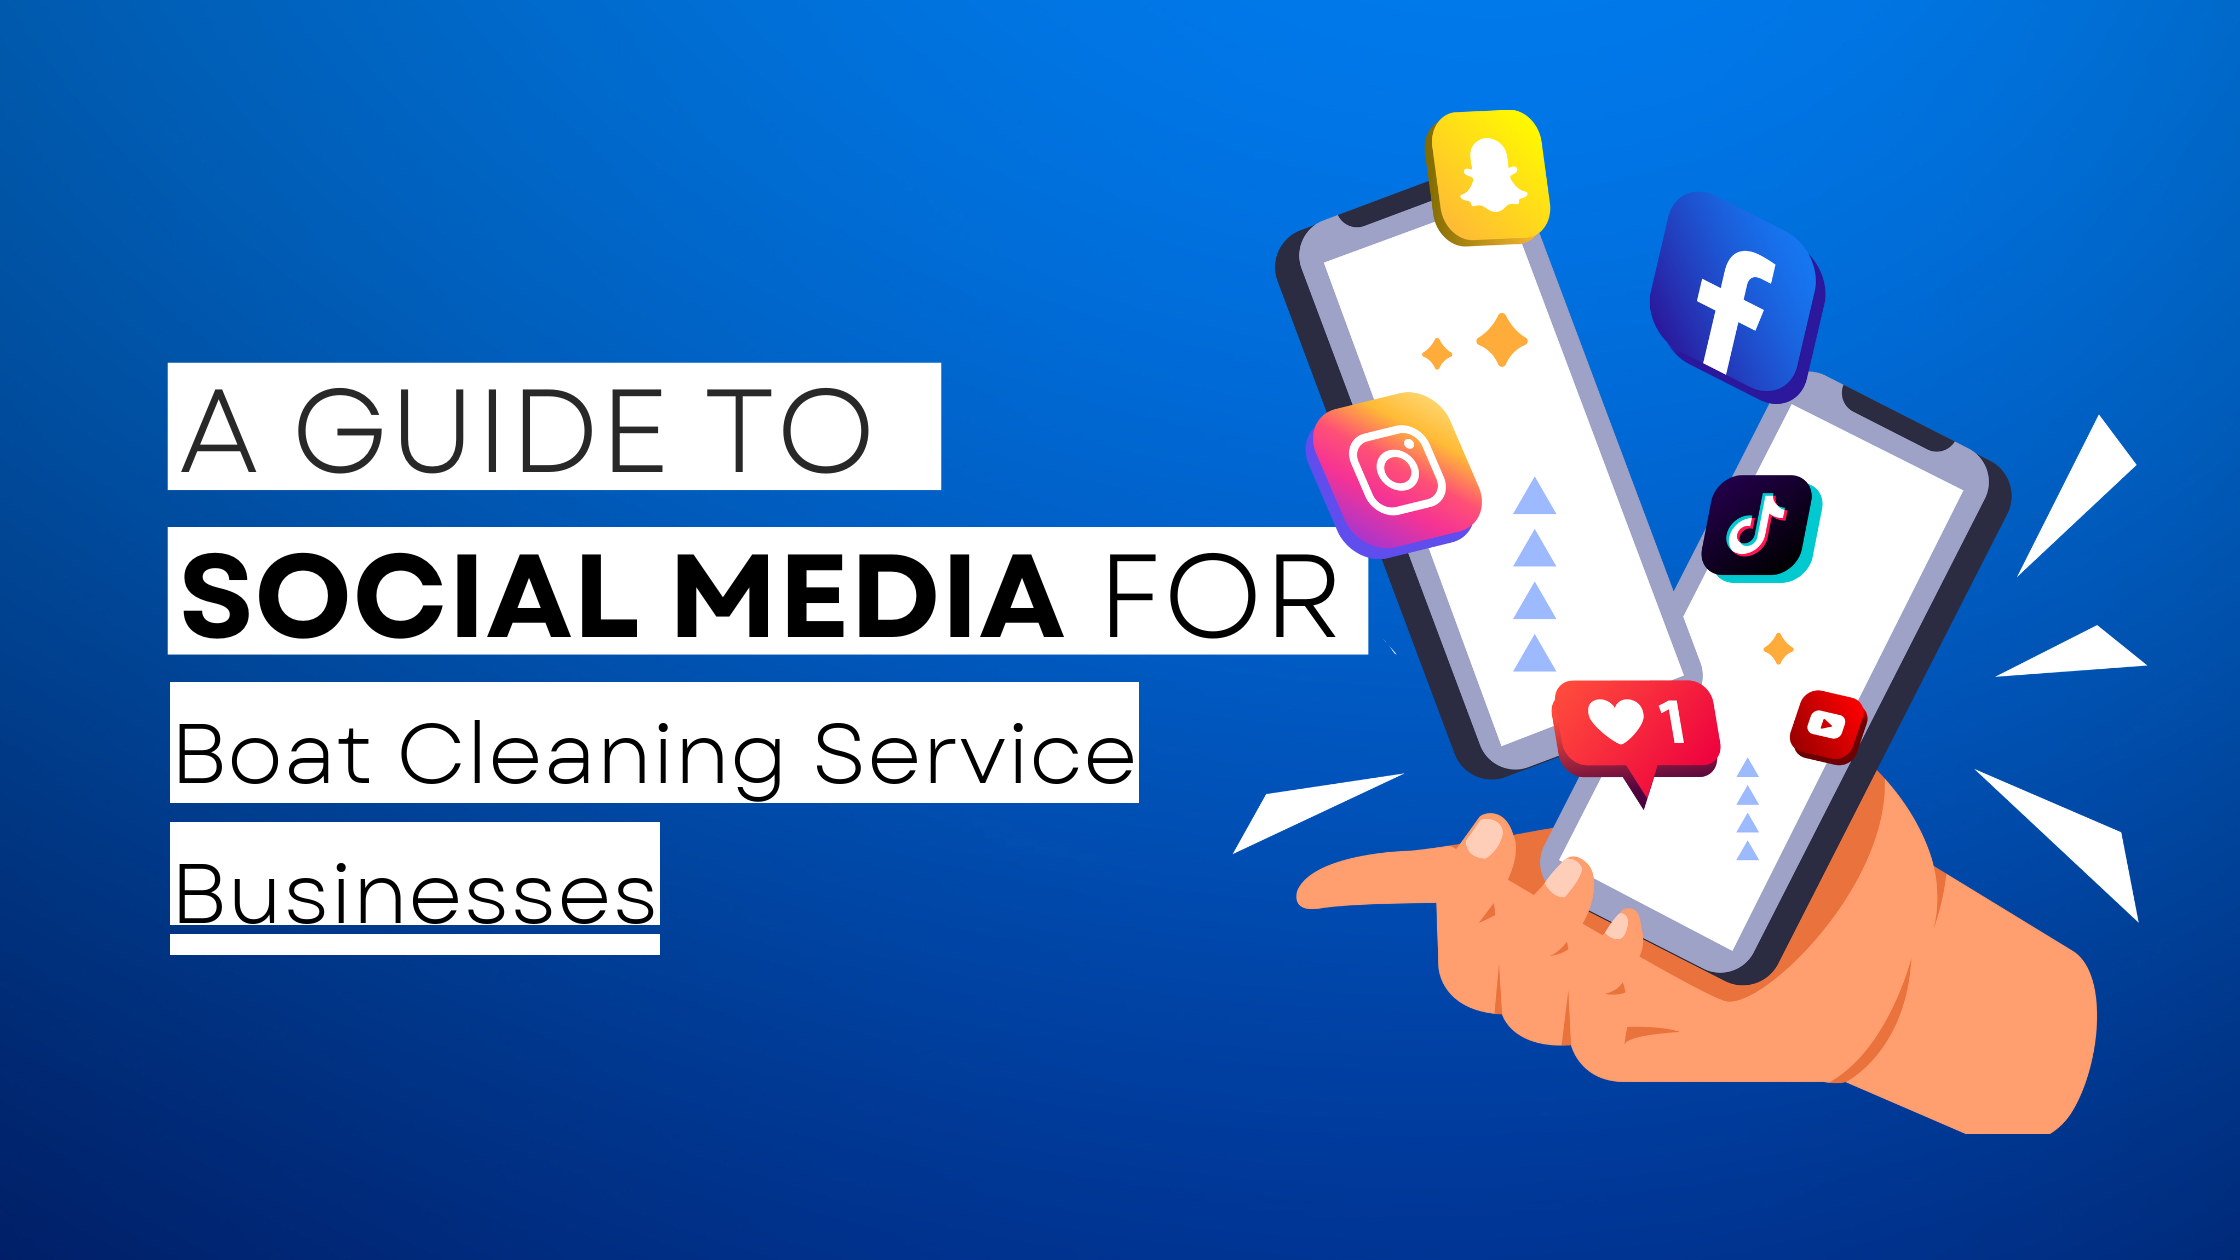 How to start Boat Cleaning Service on social media